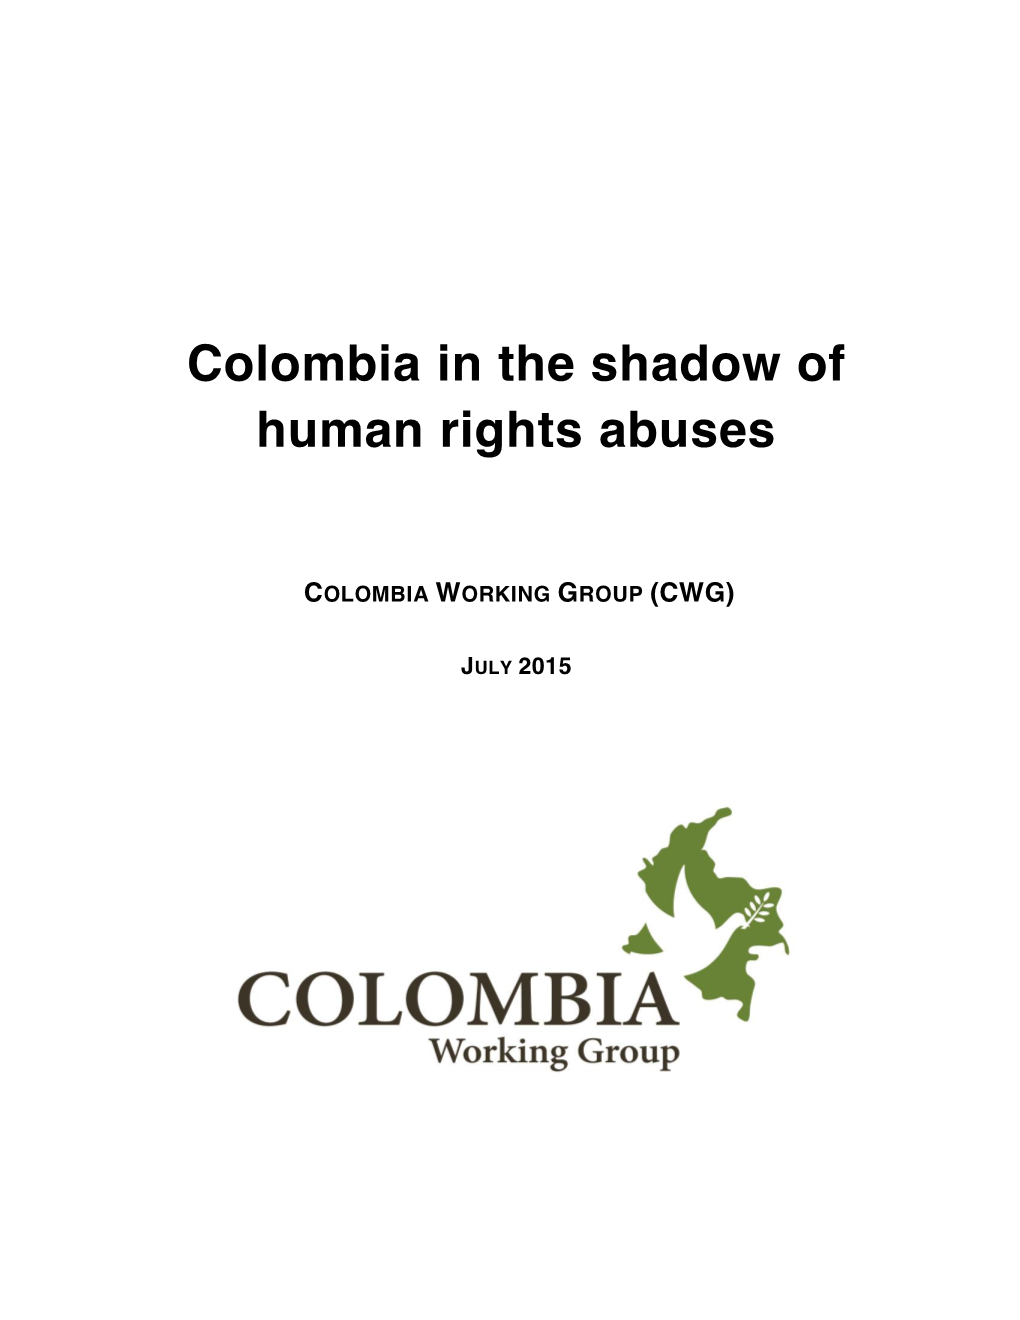 Colombia in the Shadow of Human Rights Abuses